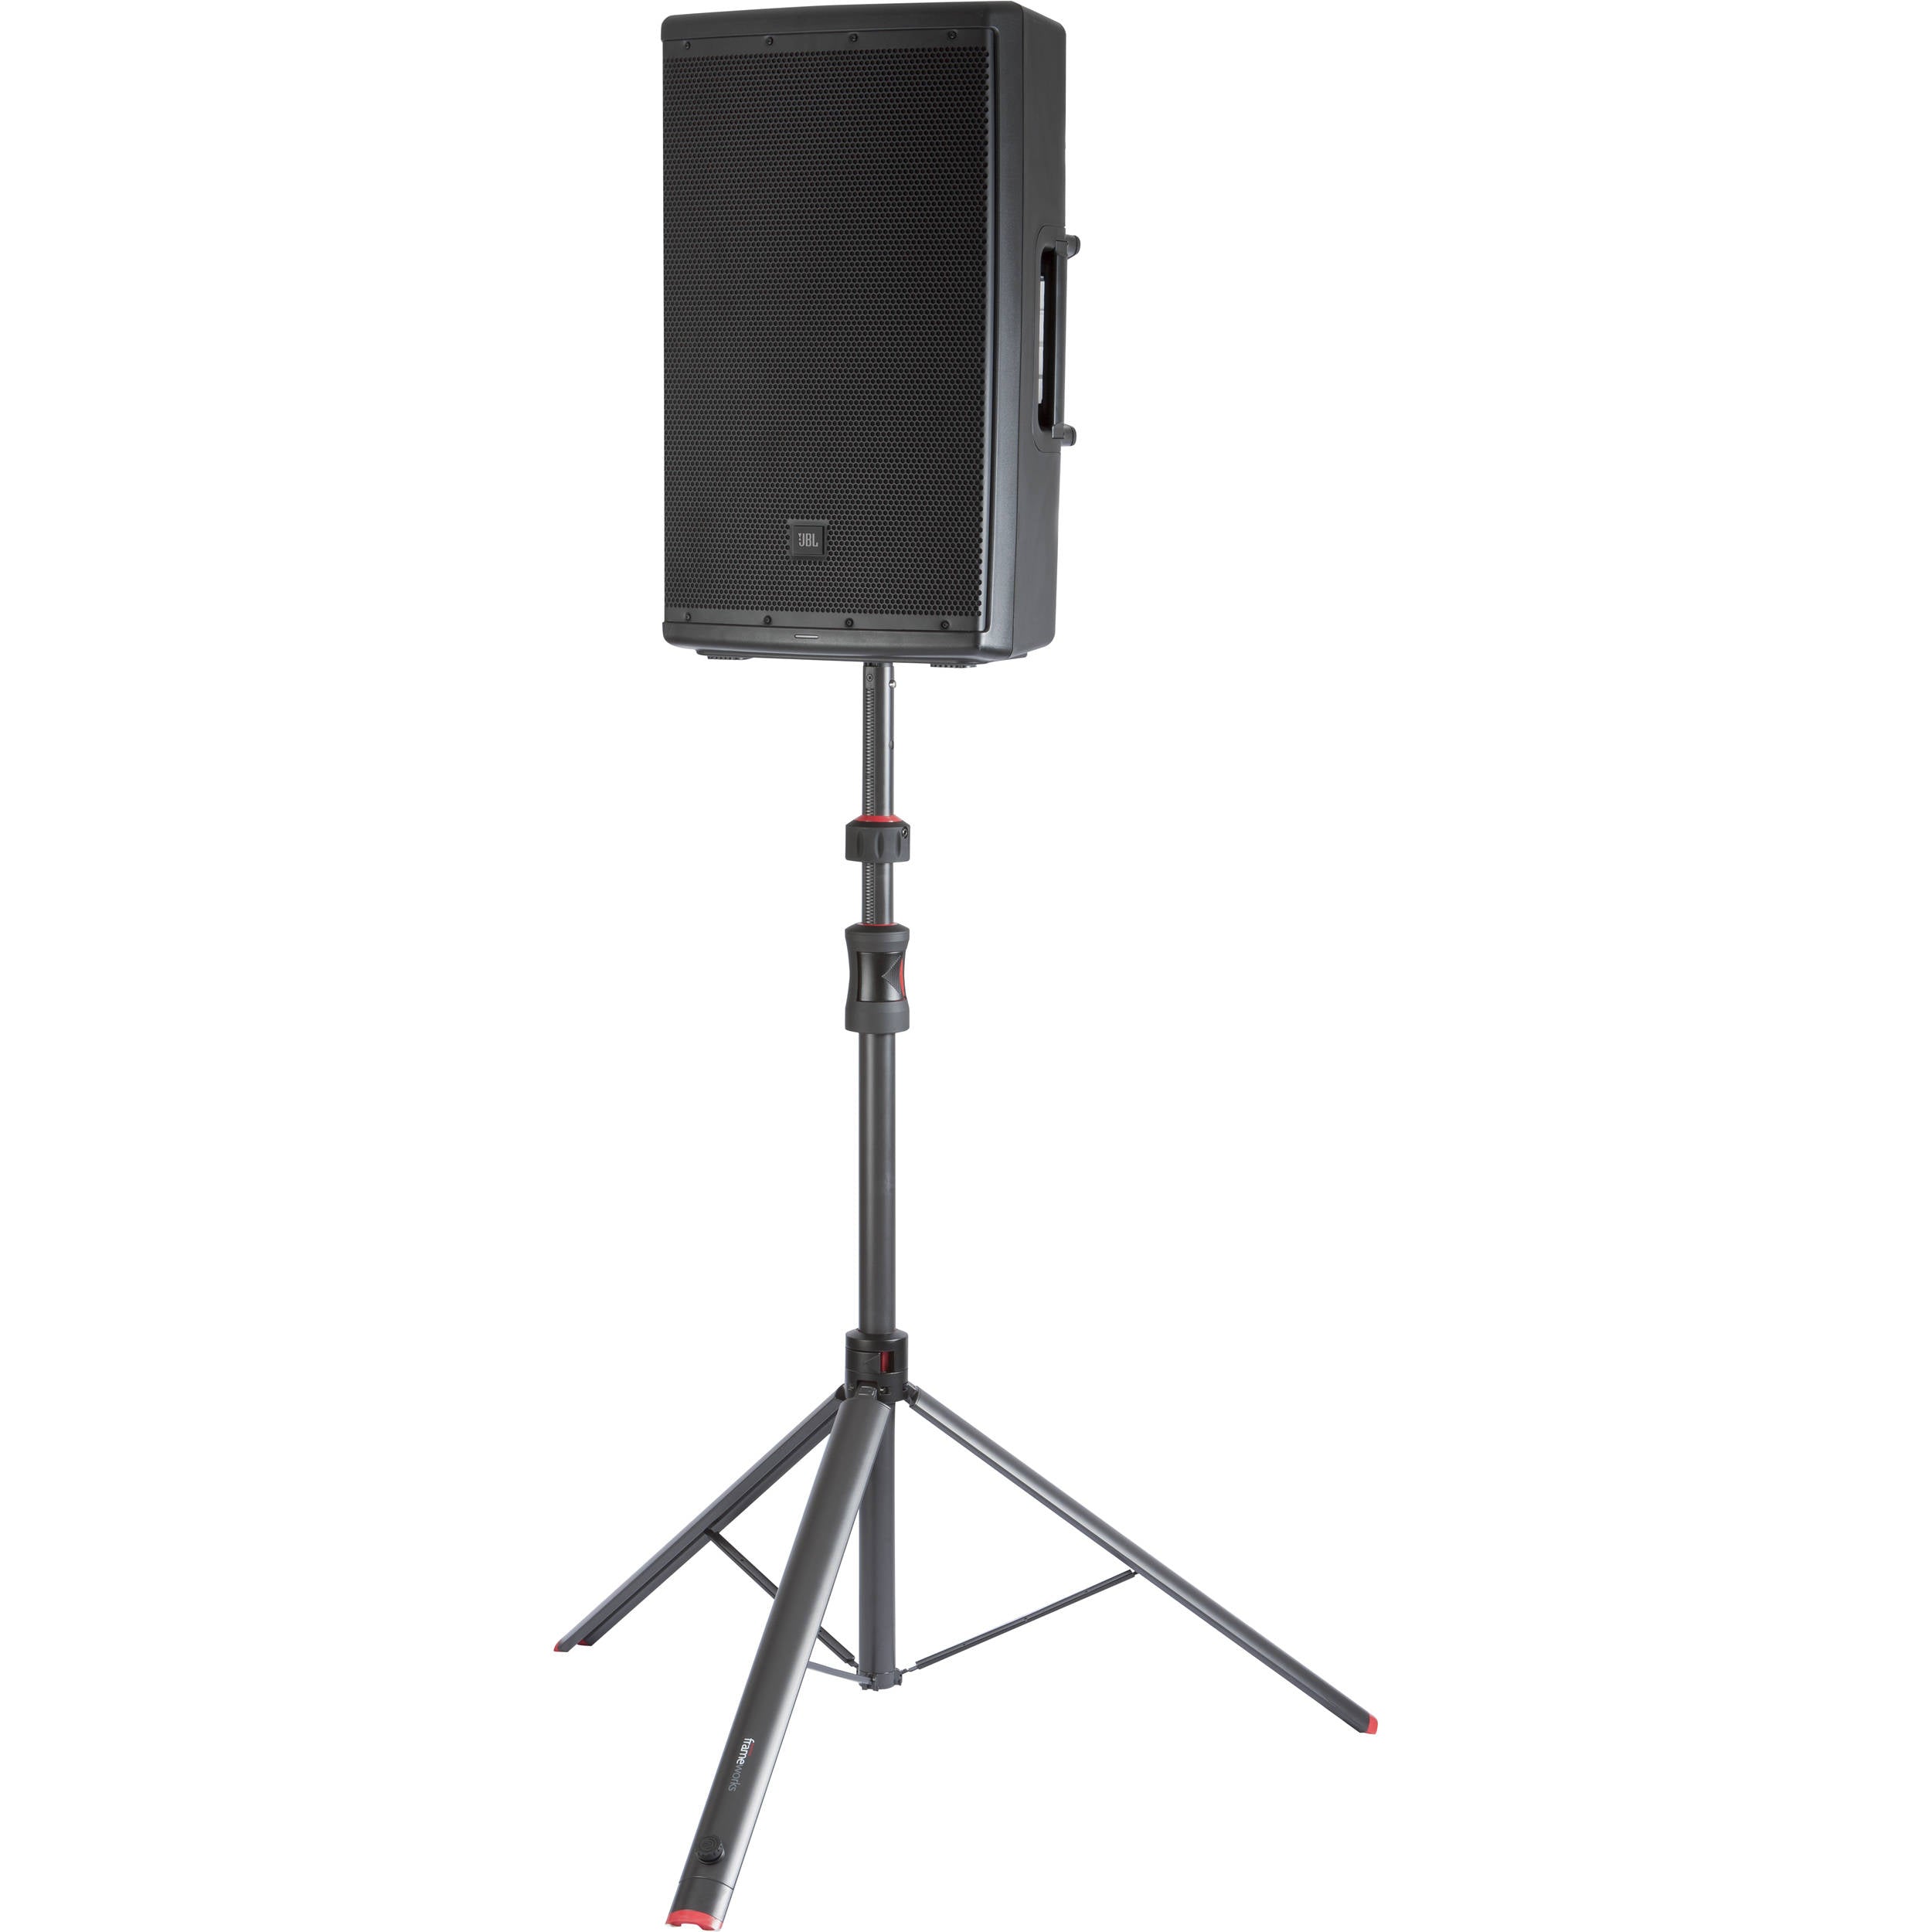 Speaker w/ Stand and Power Cable Rental